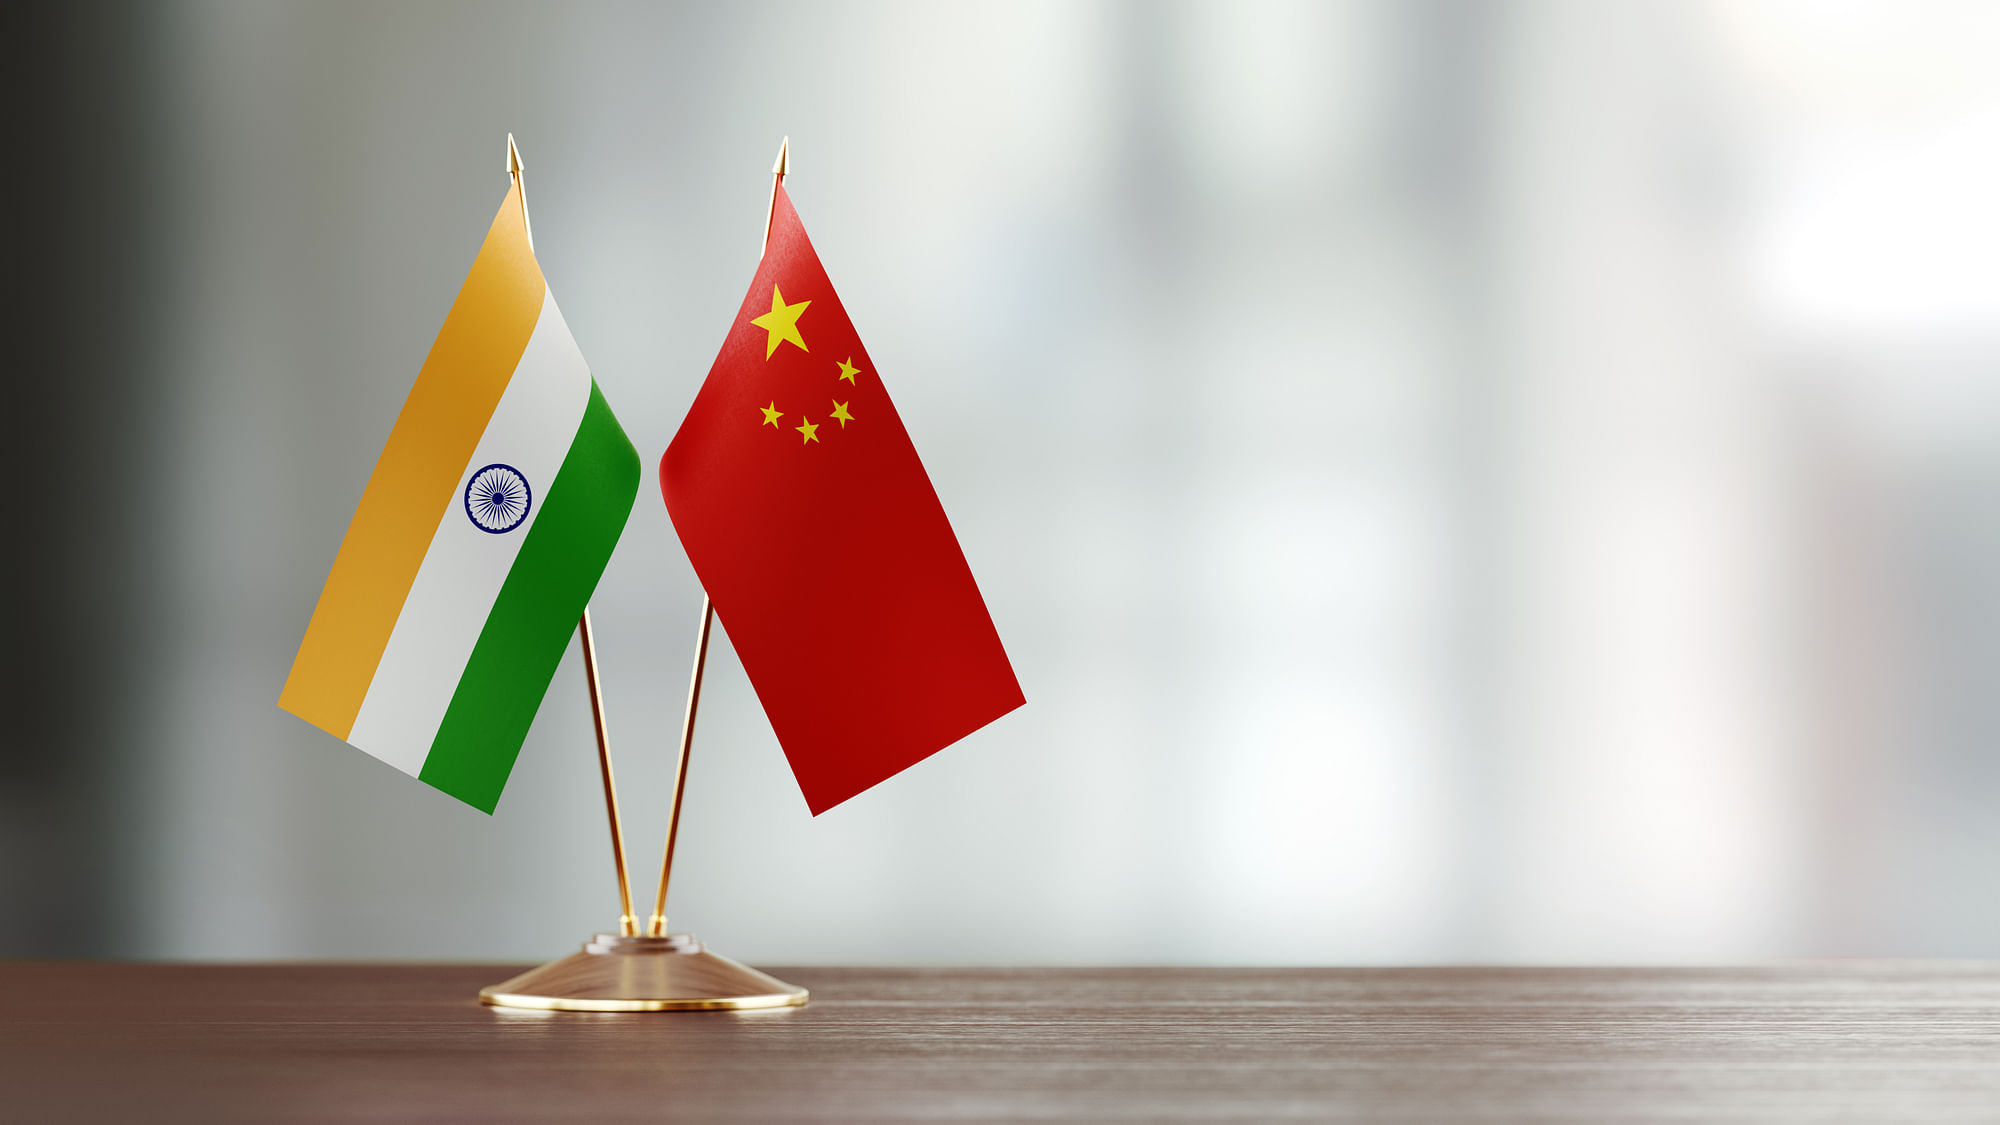 RSS-Affiliated SJM has urged PM Modi to create hurdles for Chinese companies doing business in India.